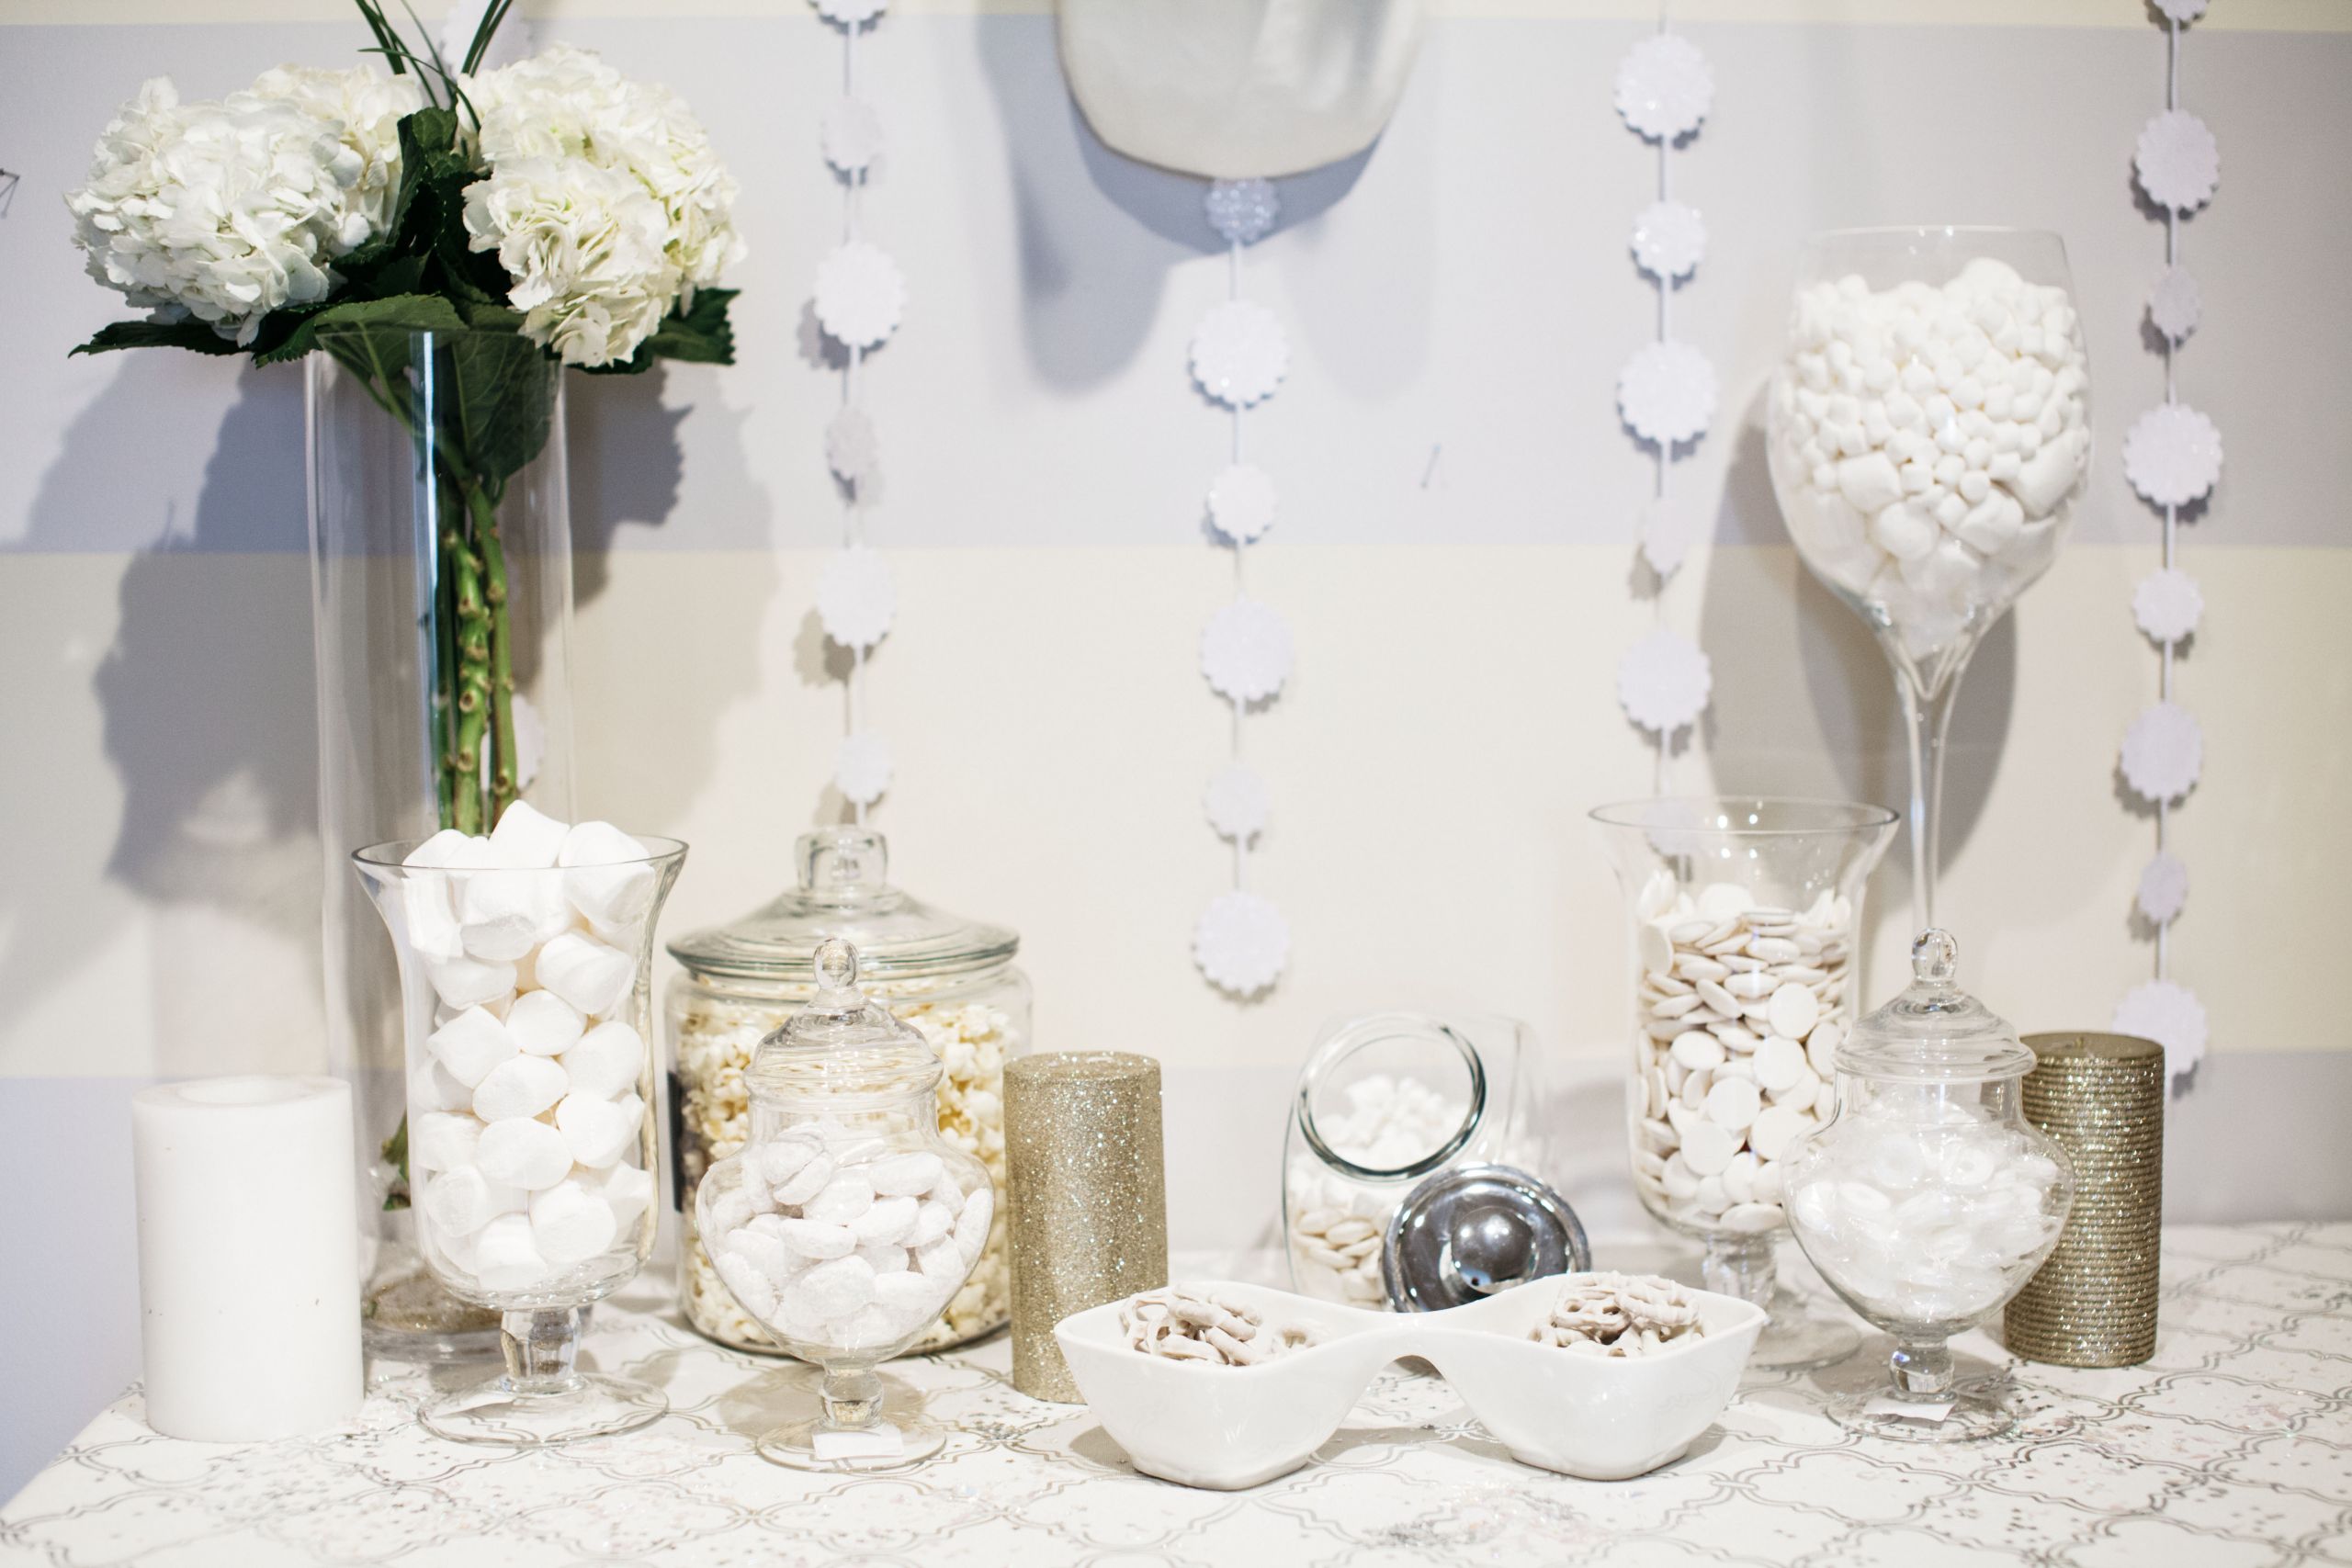 All White Birthday Party Ideas
 The Chic Series Winter White Party Decor